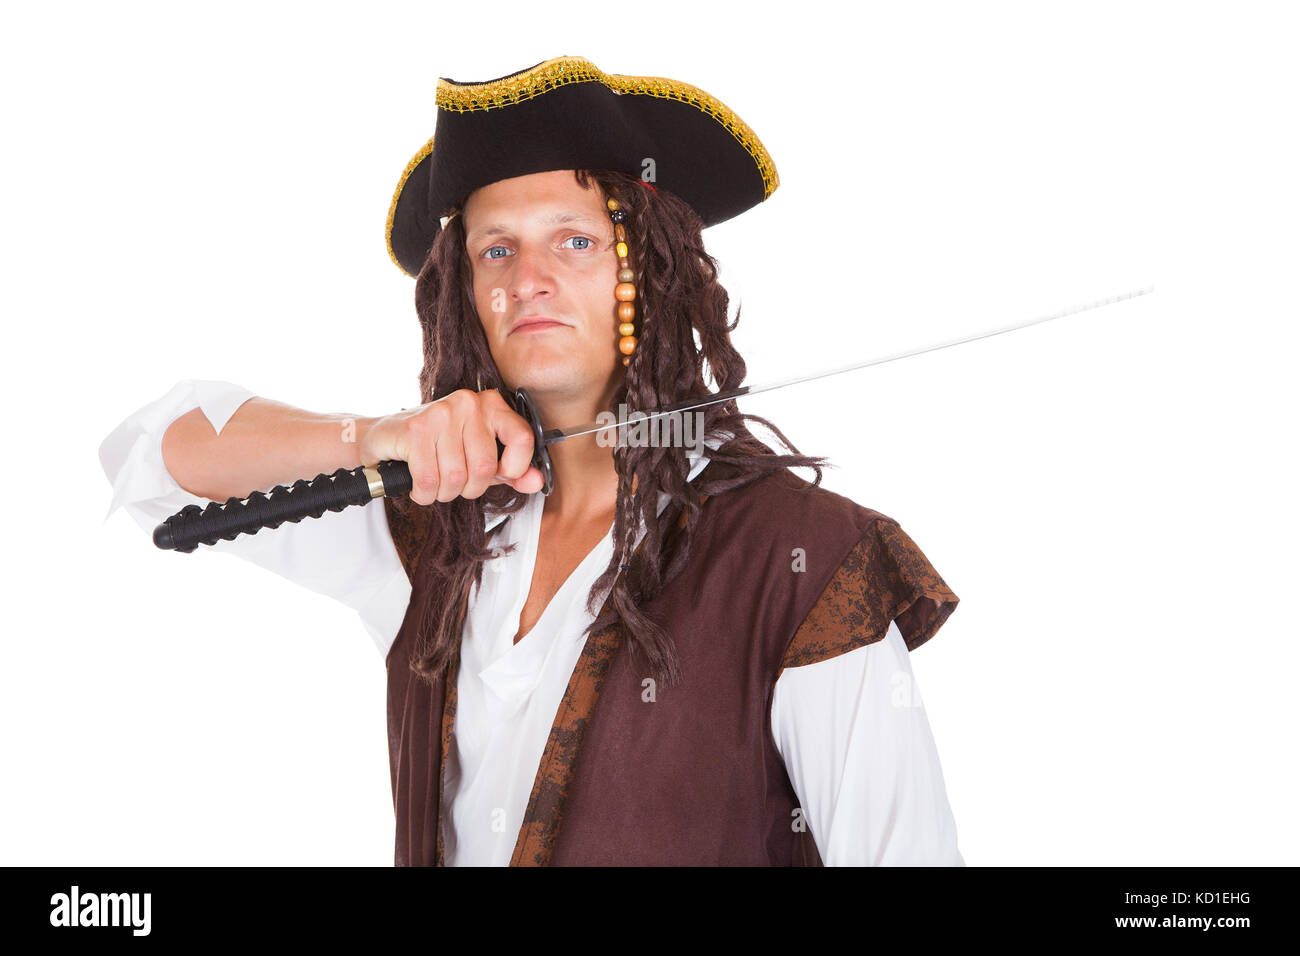 Portrait Of A Young Pirate Holding Sword On White Background Stock ...